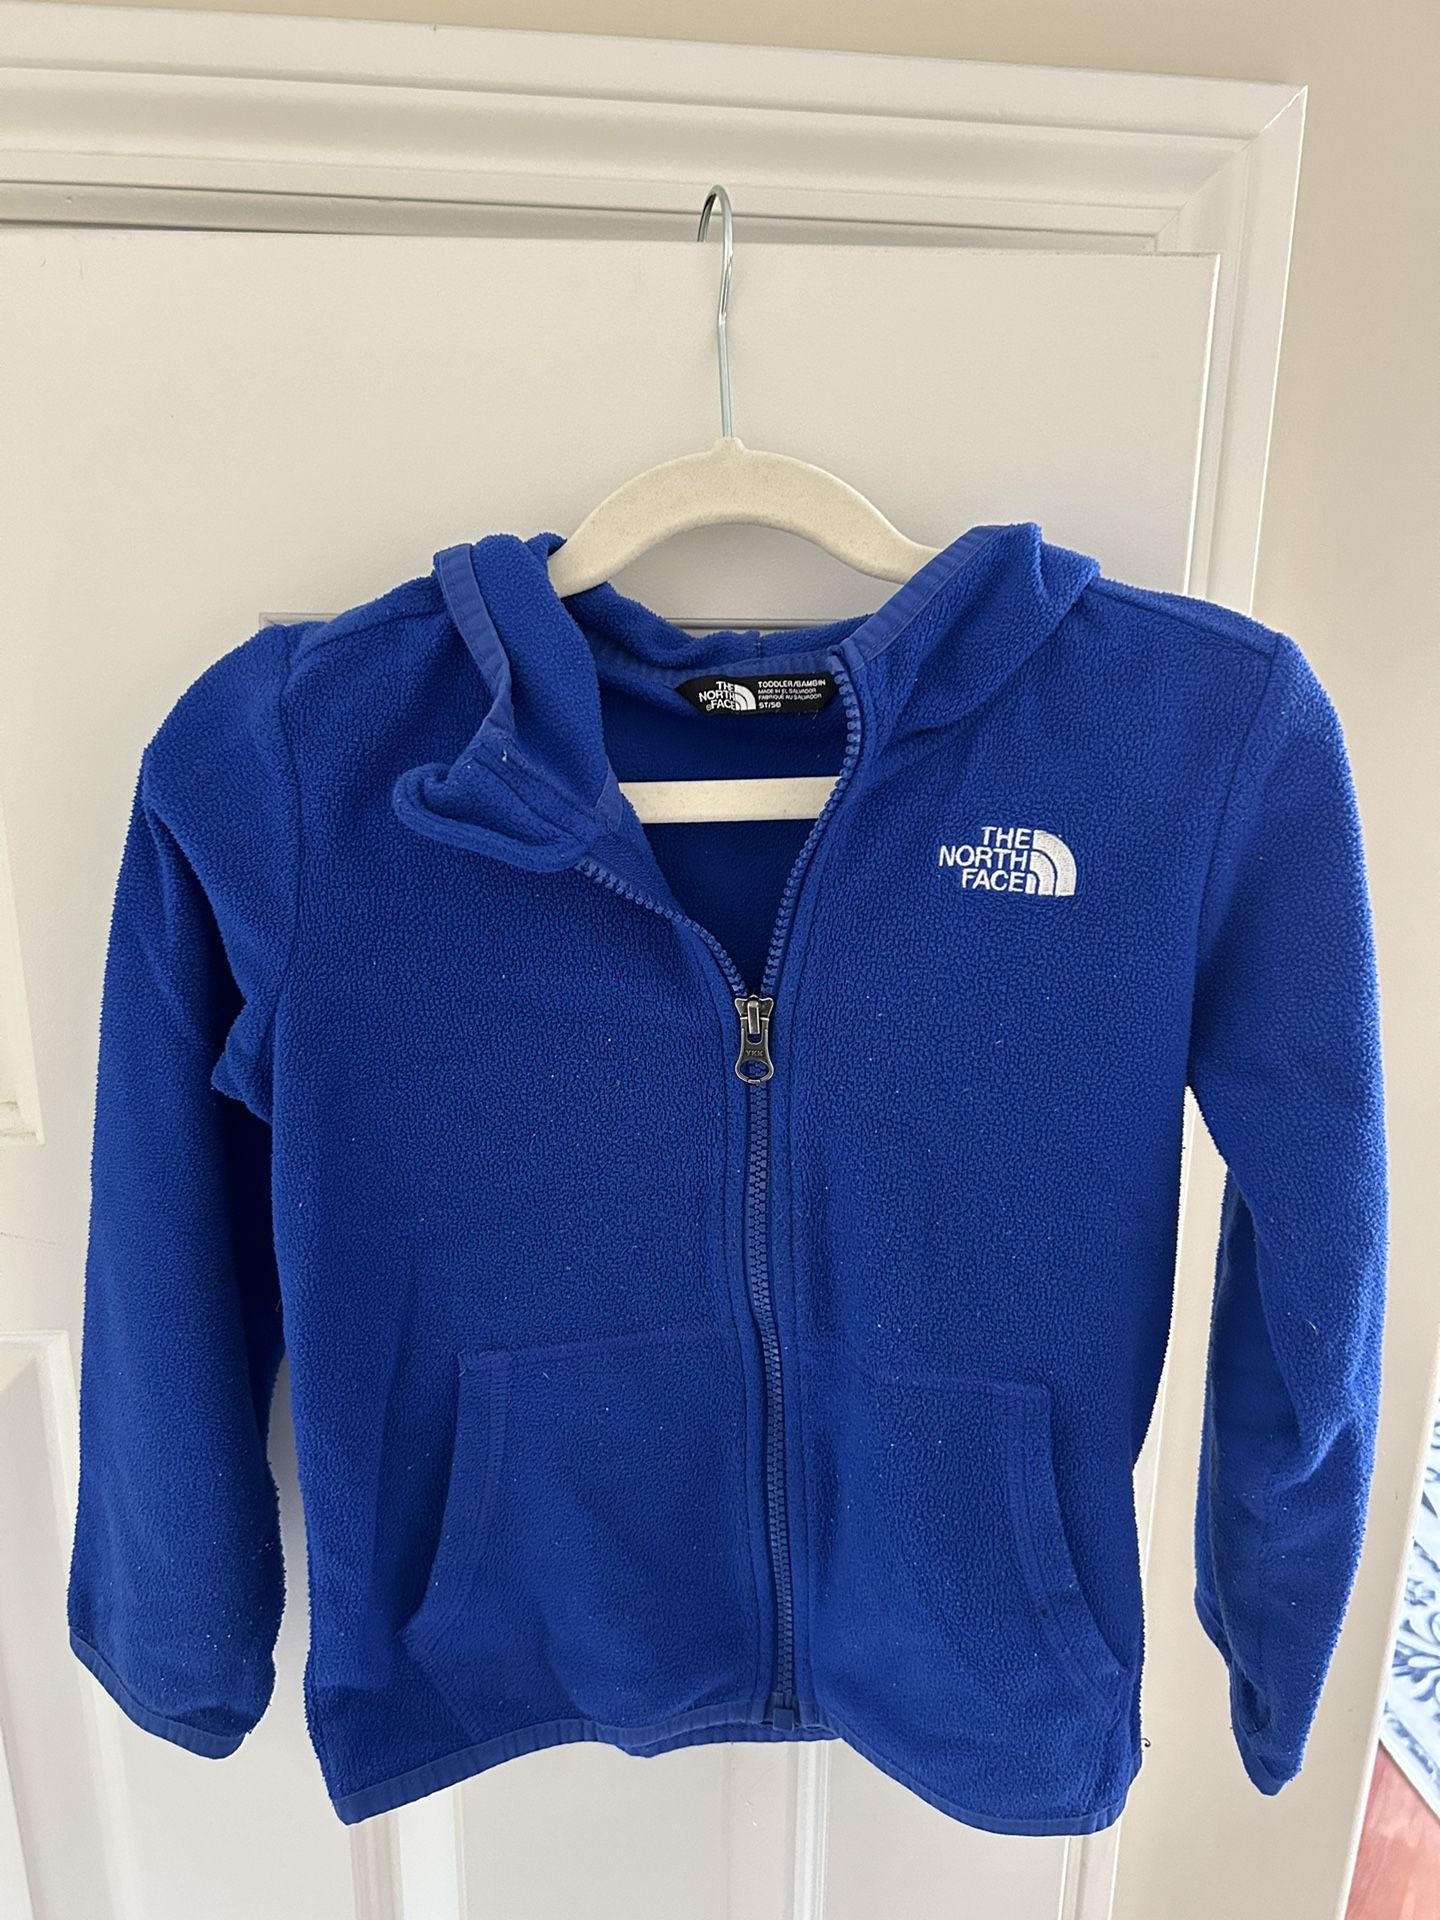 Boys 5T North Face Jacket With Hood